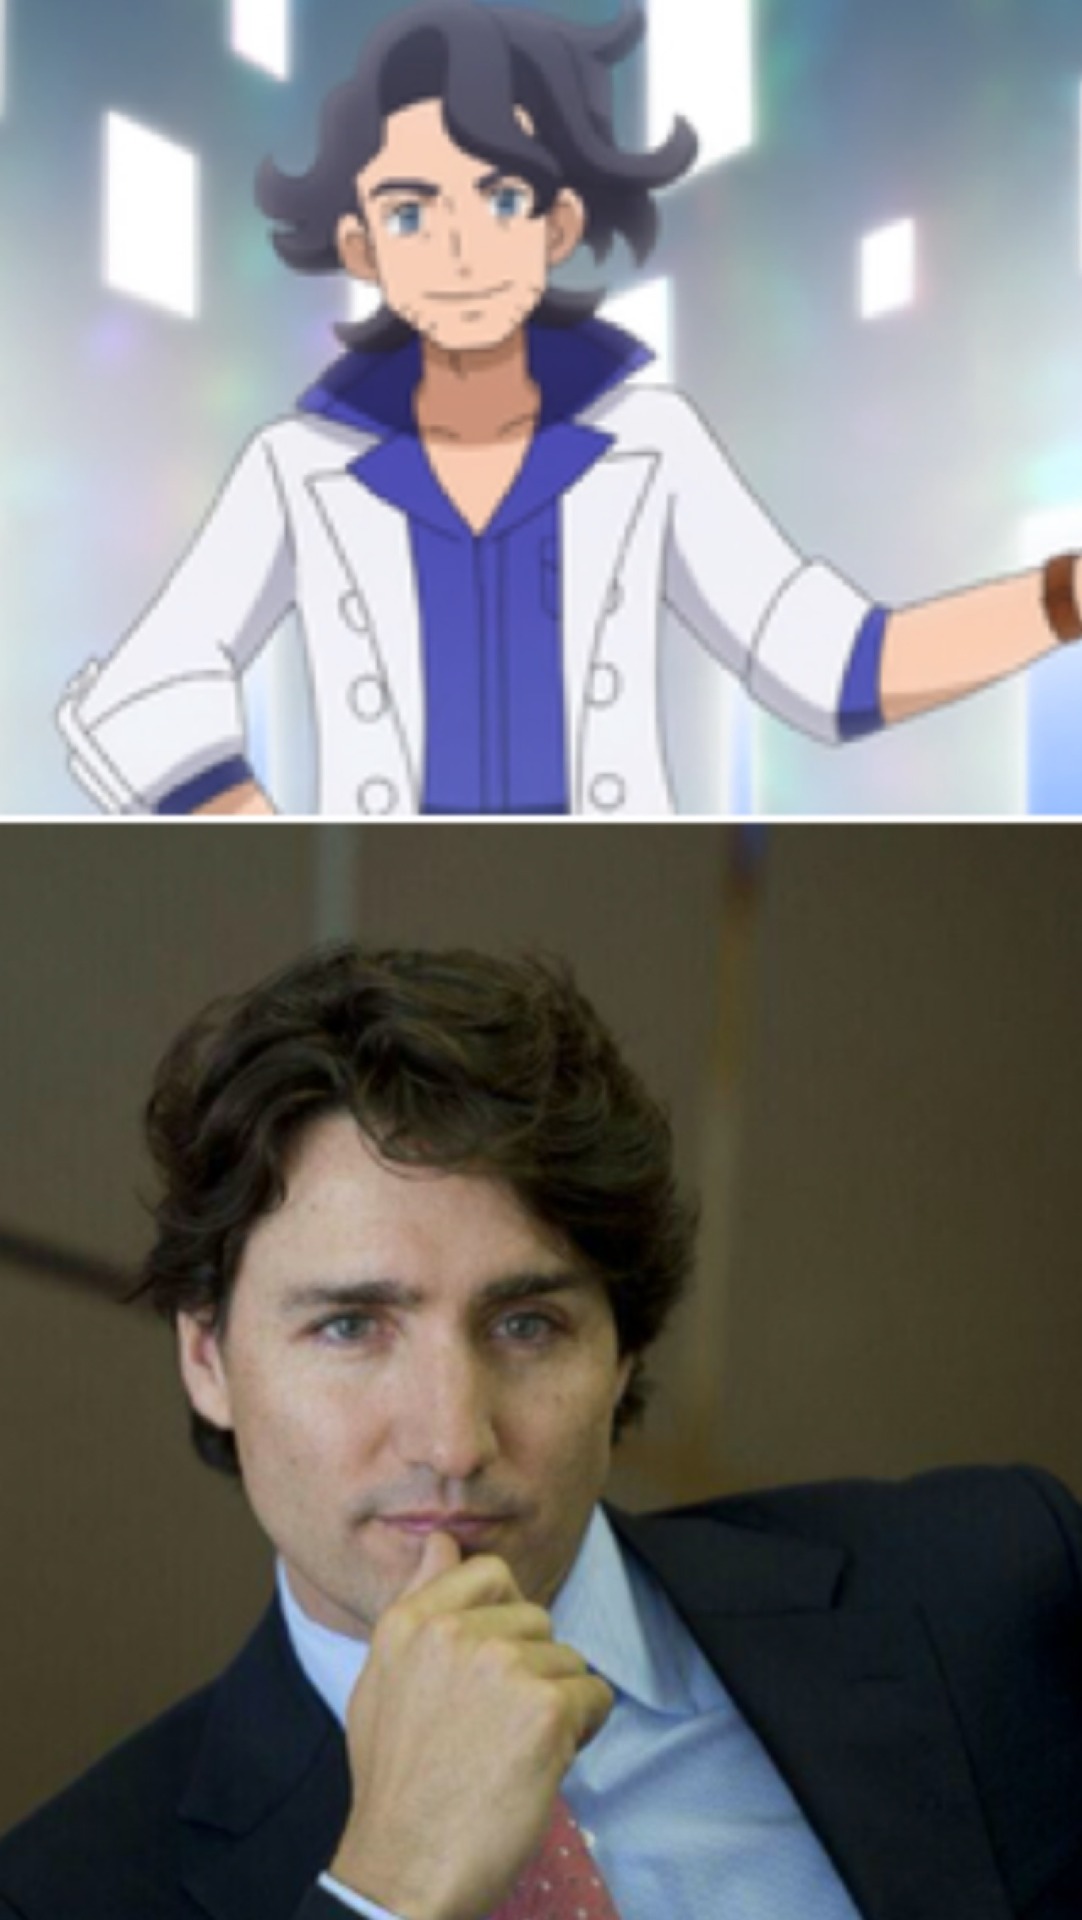 who is the prime minister of canada